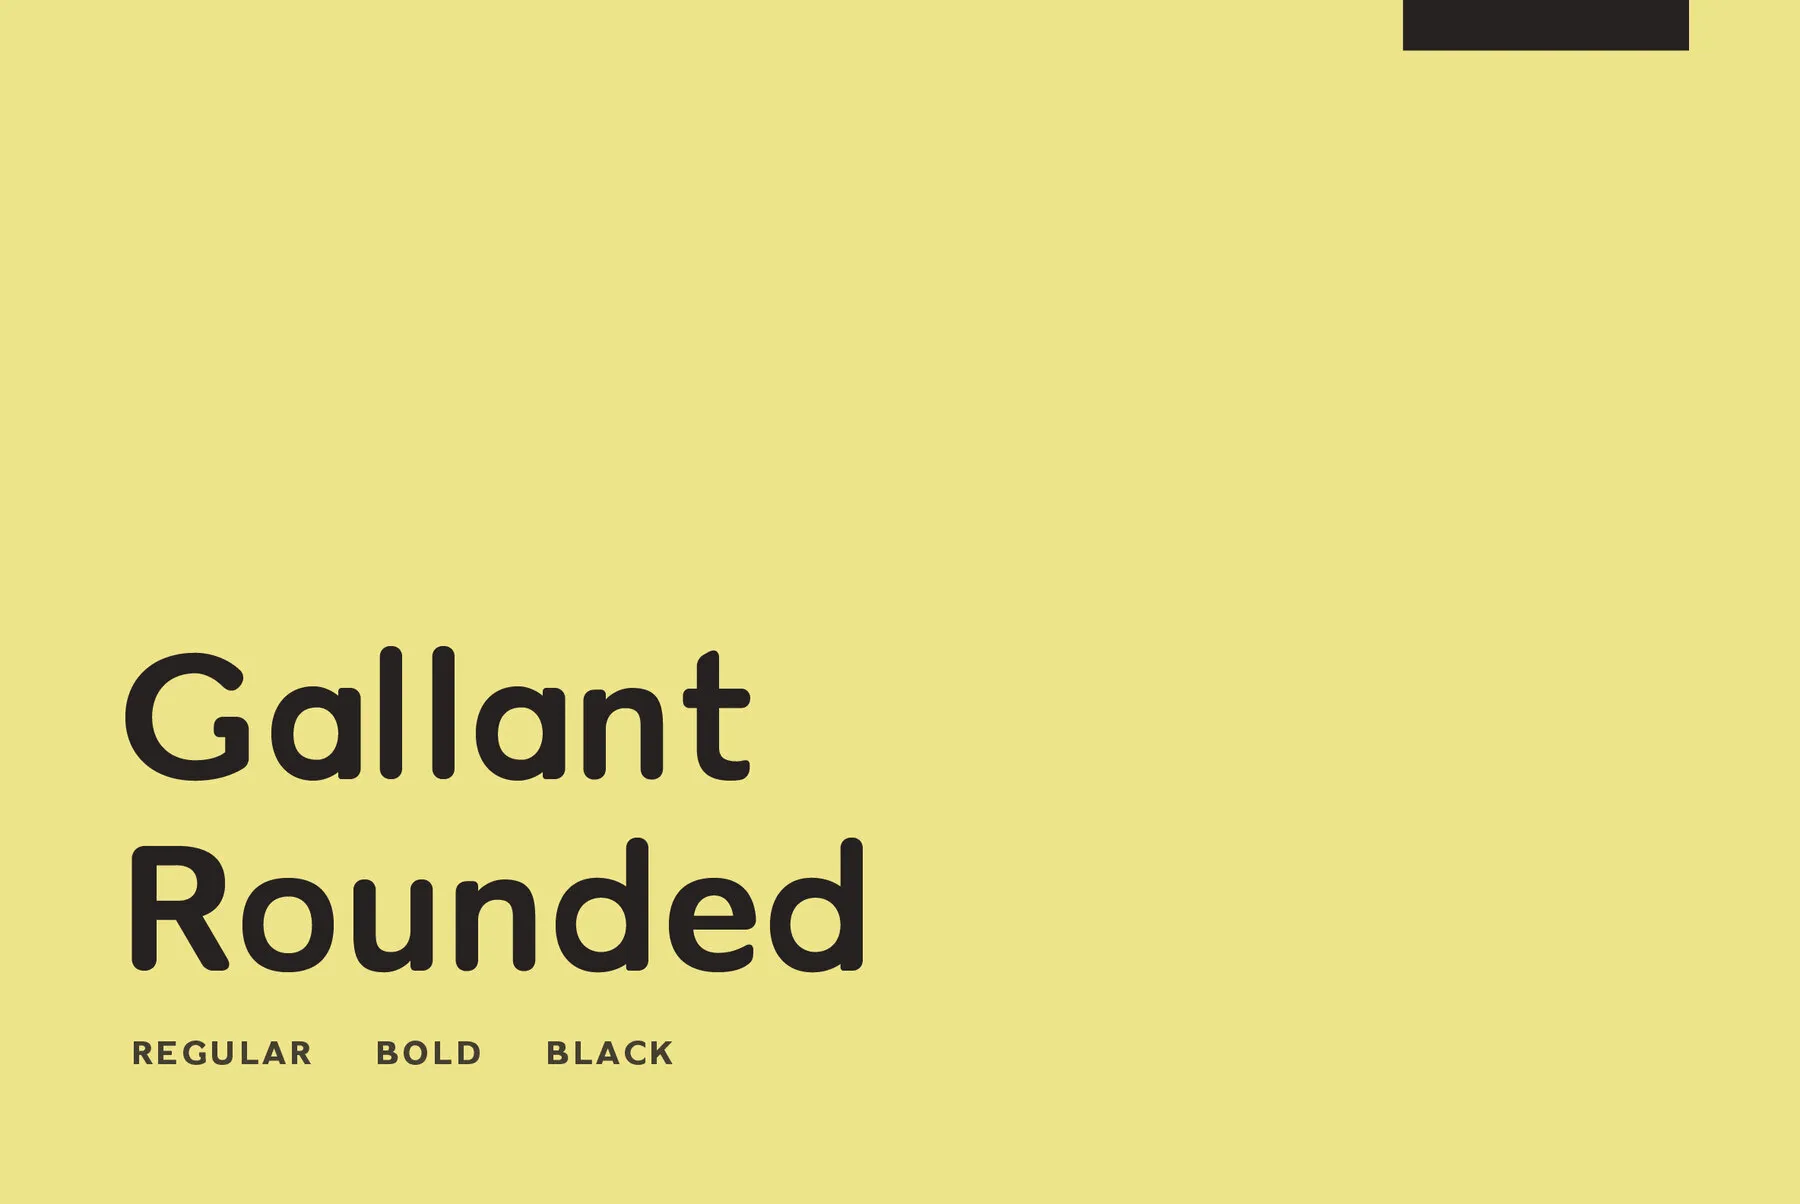 Gallant Rounded